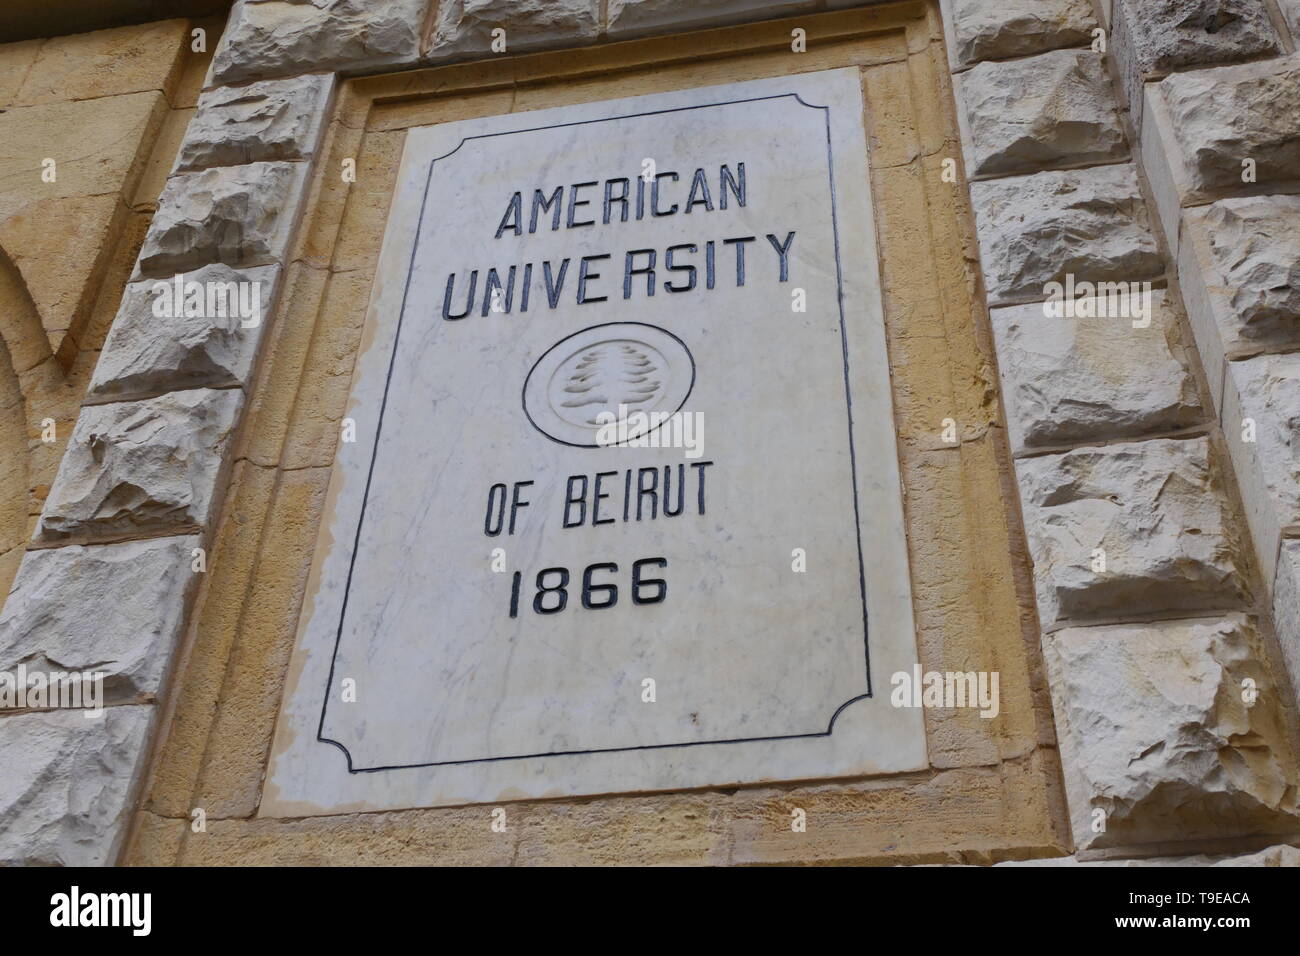 BEIRUT, LEBANON - DECEMBER 23, 2018: The stone Logo of the American University of Beirut, founded in 1866 Stock Photo